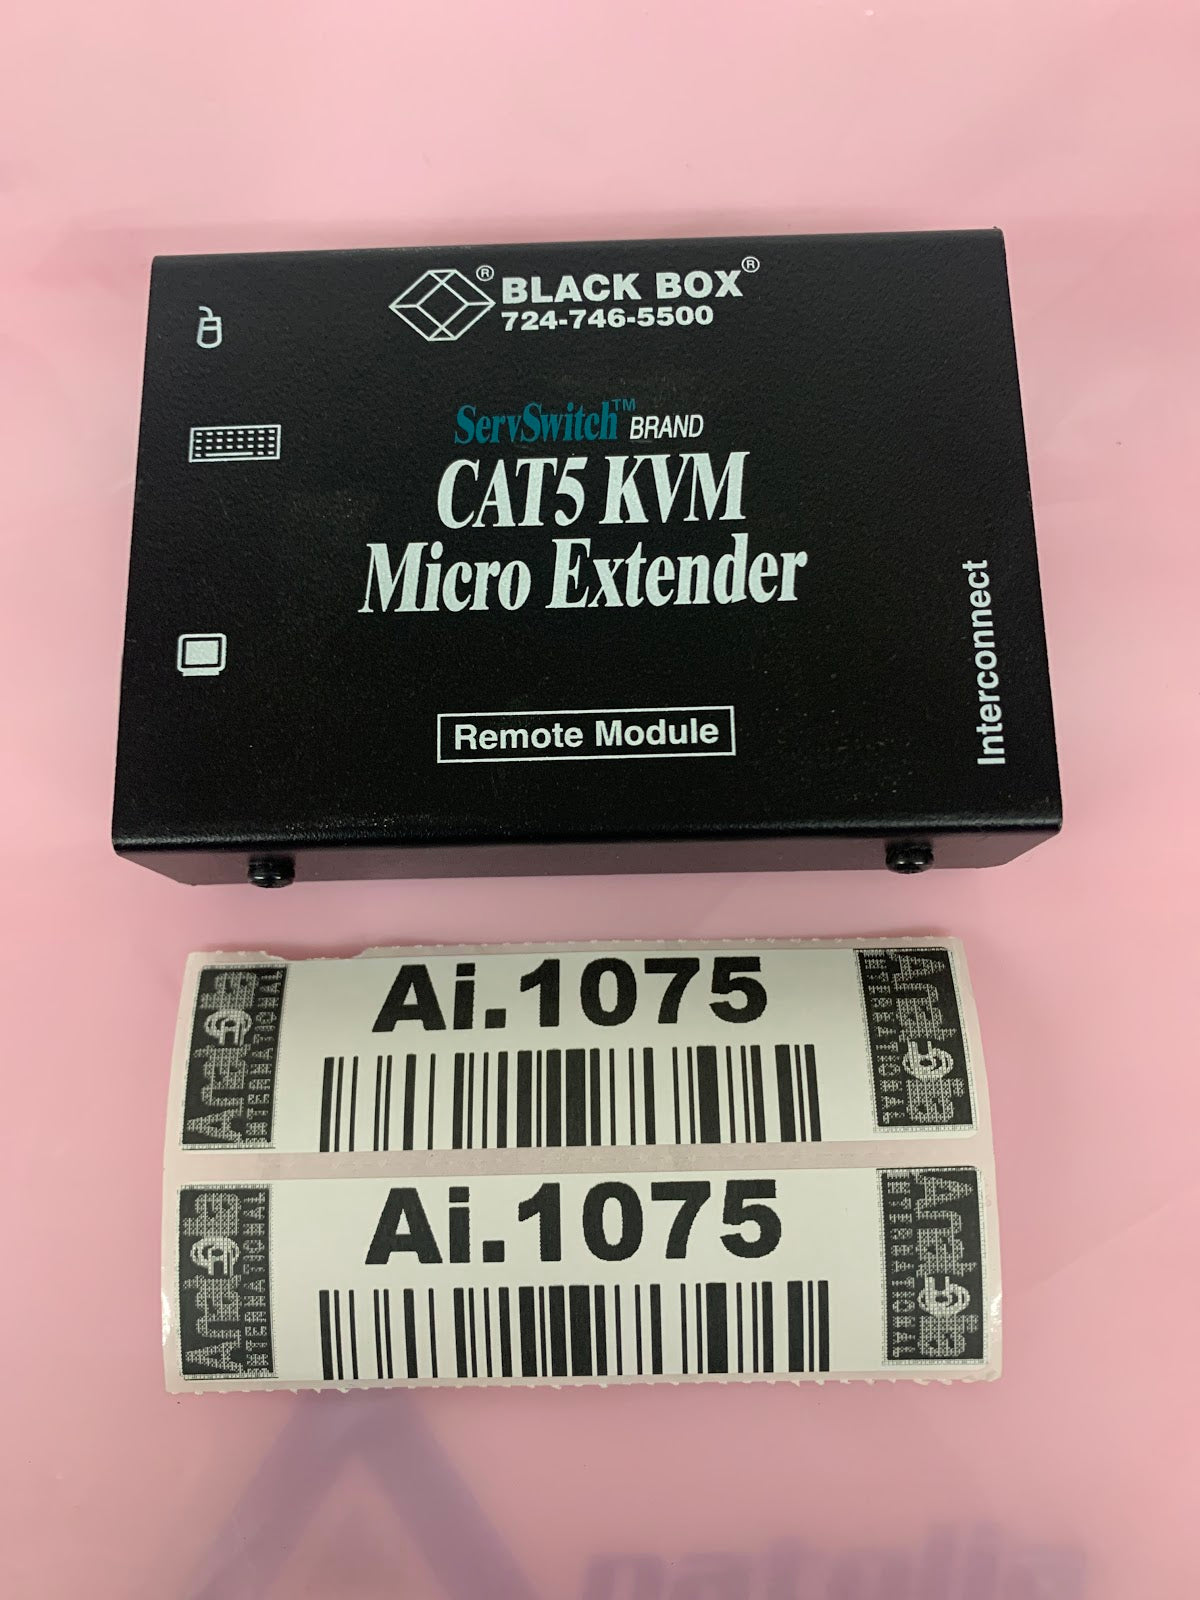 CAT5 KVM Micro Extender For GE Innoca 3100 IQ P/N: ACU3001A (Remote). Pulled from functioning Equipment, contact for more info.